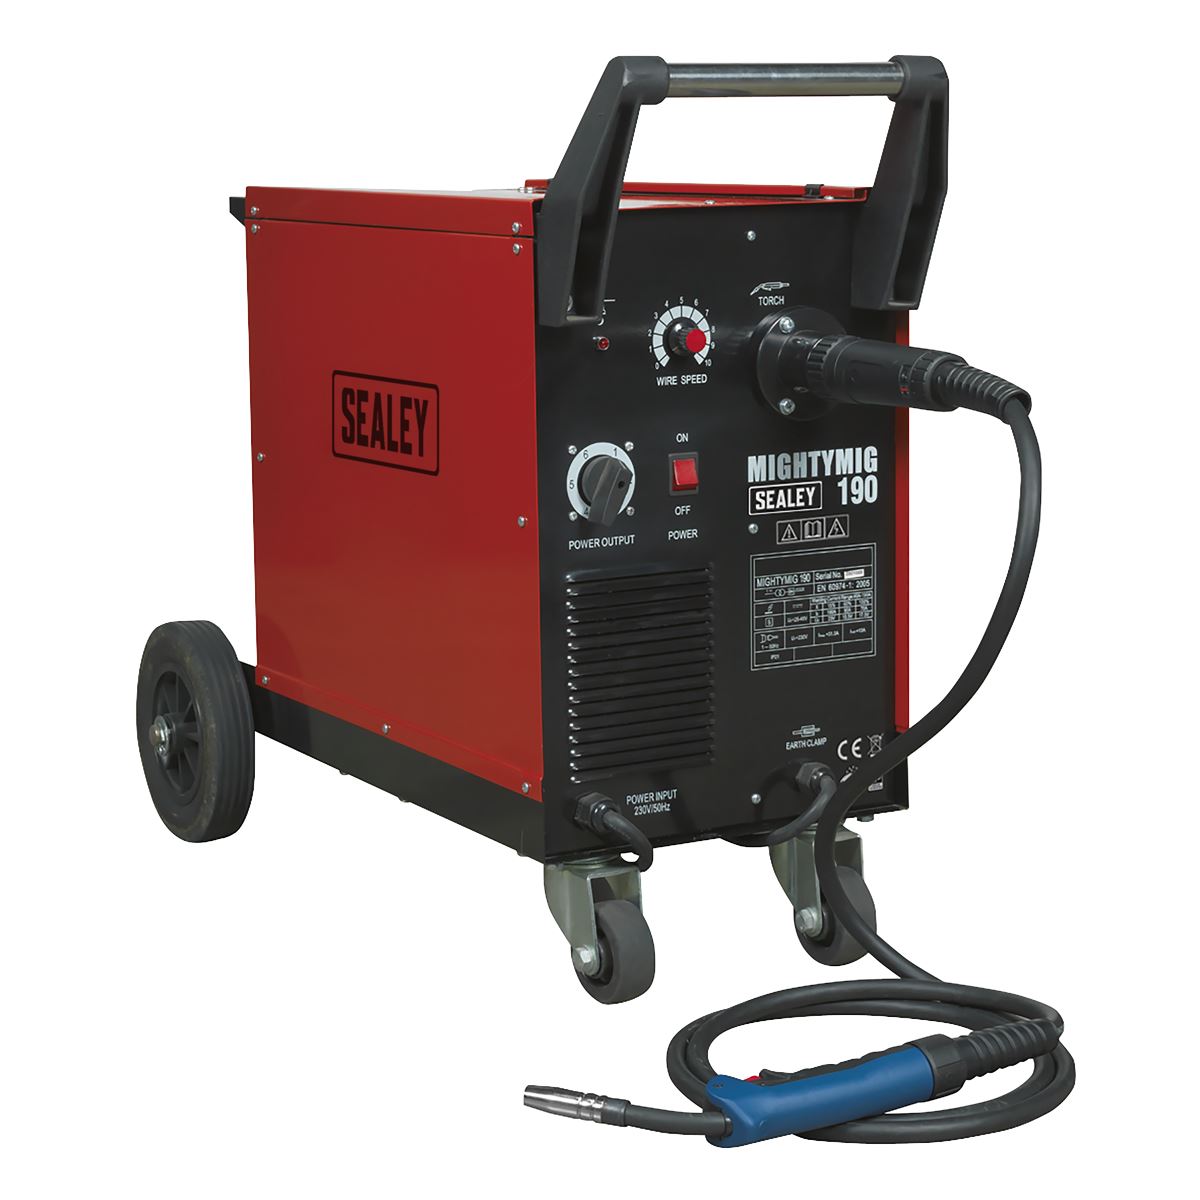 Sealey Professional Gas/Gasless MIG Welder 190A with Euro Torch